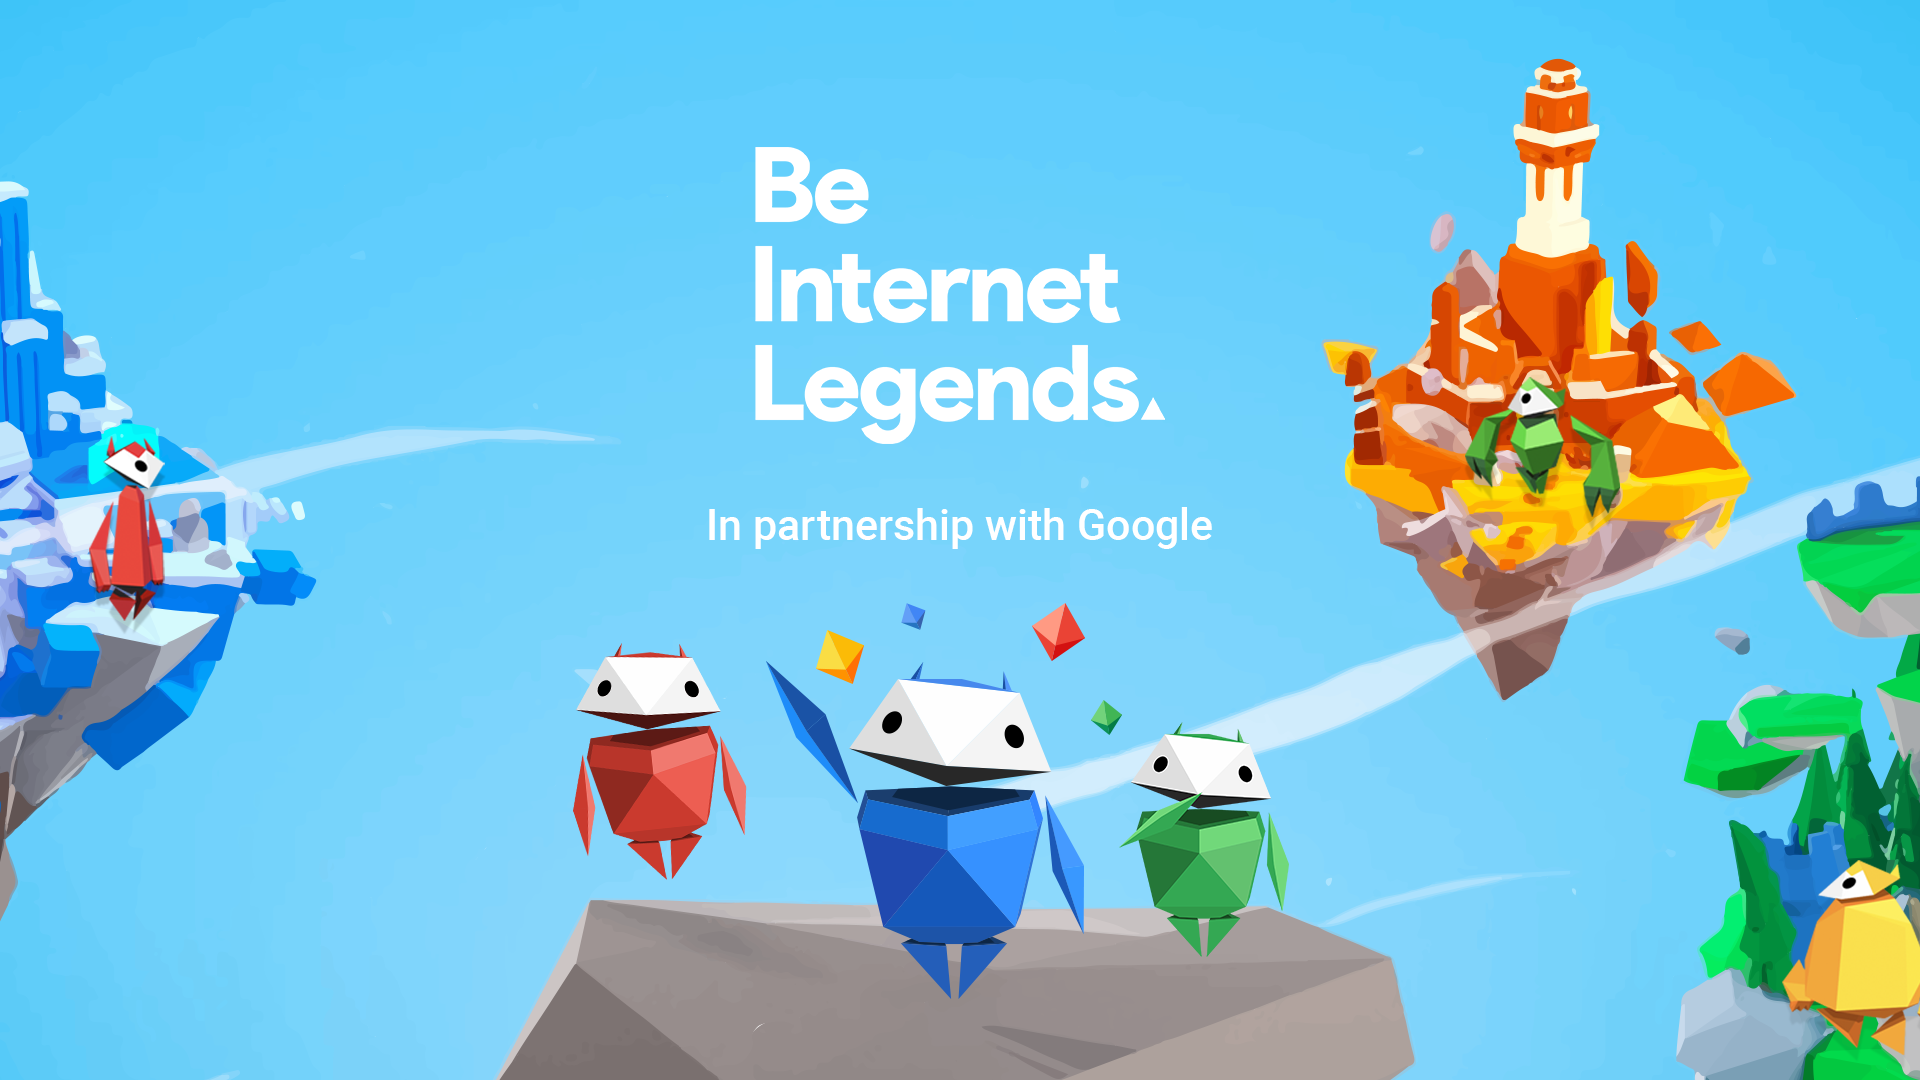 Be Internet Legends in partnership with Google